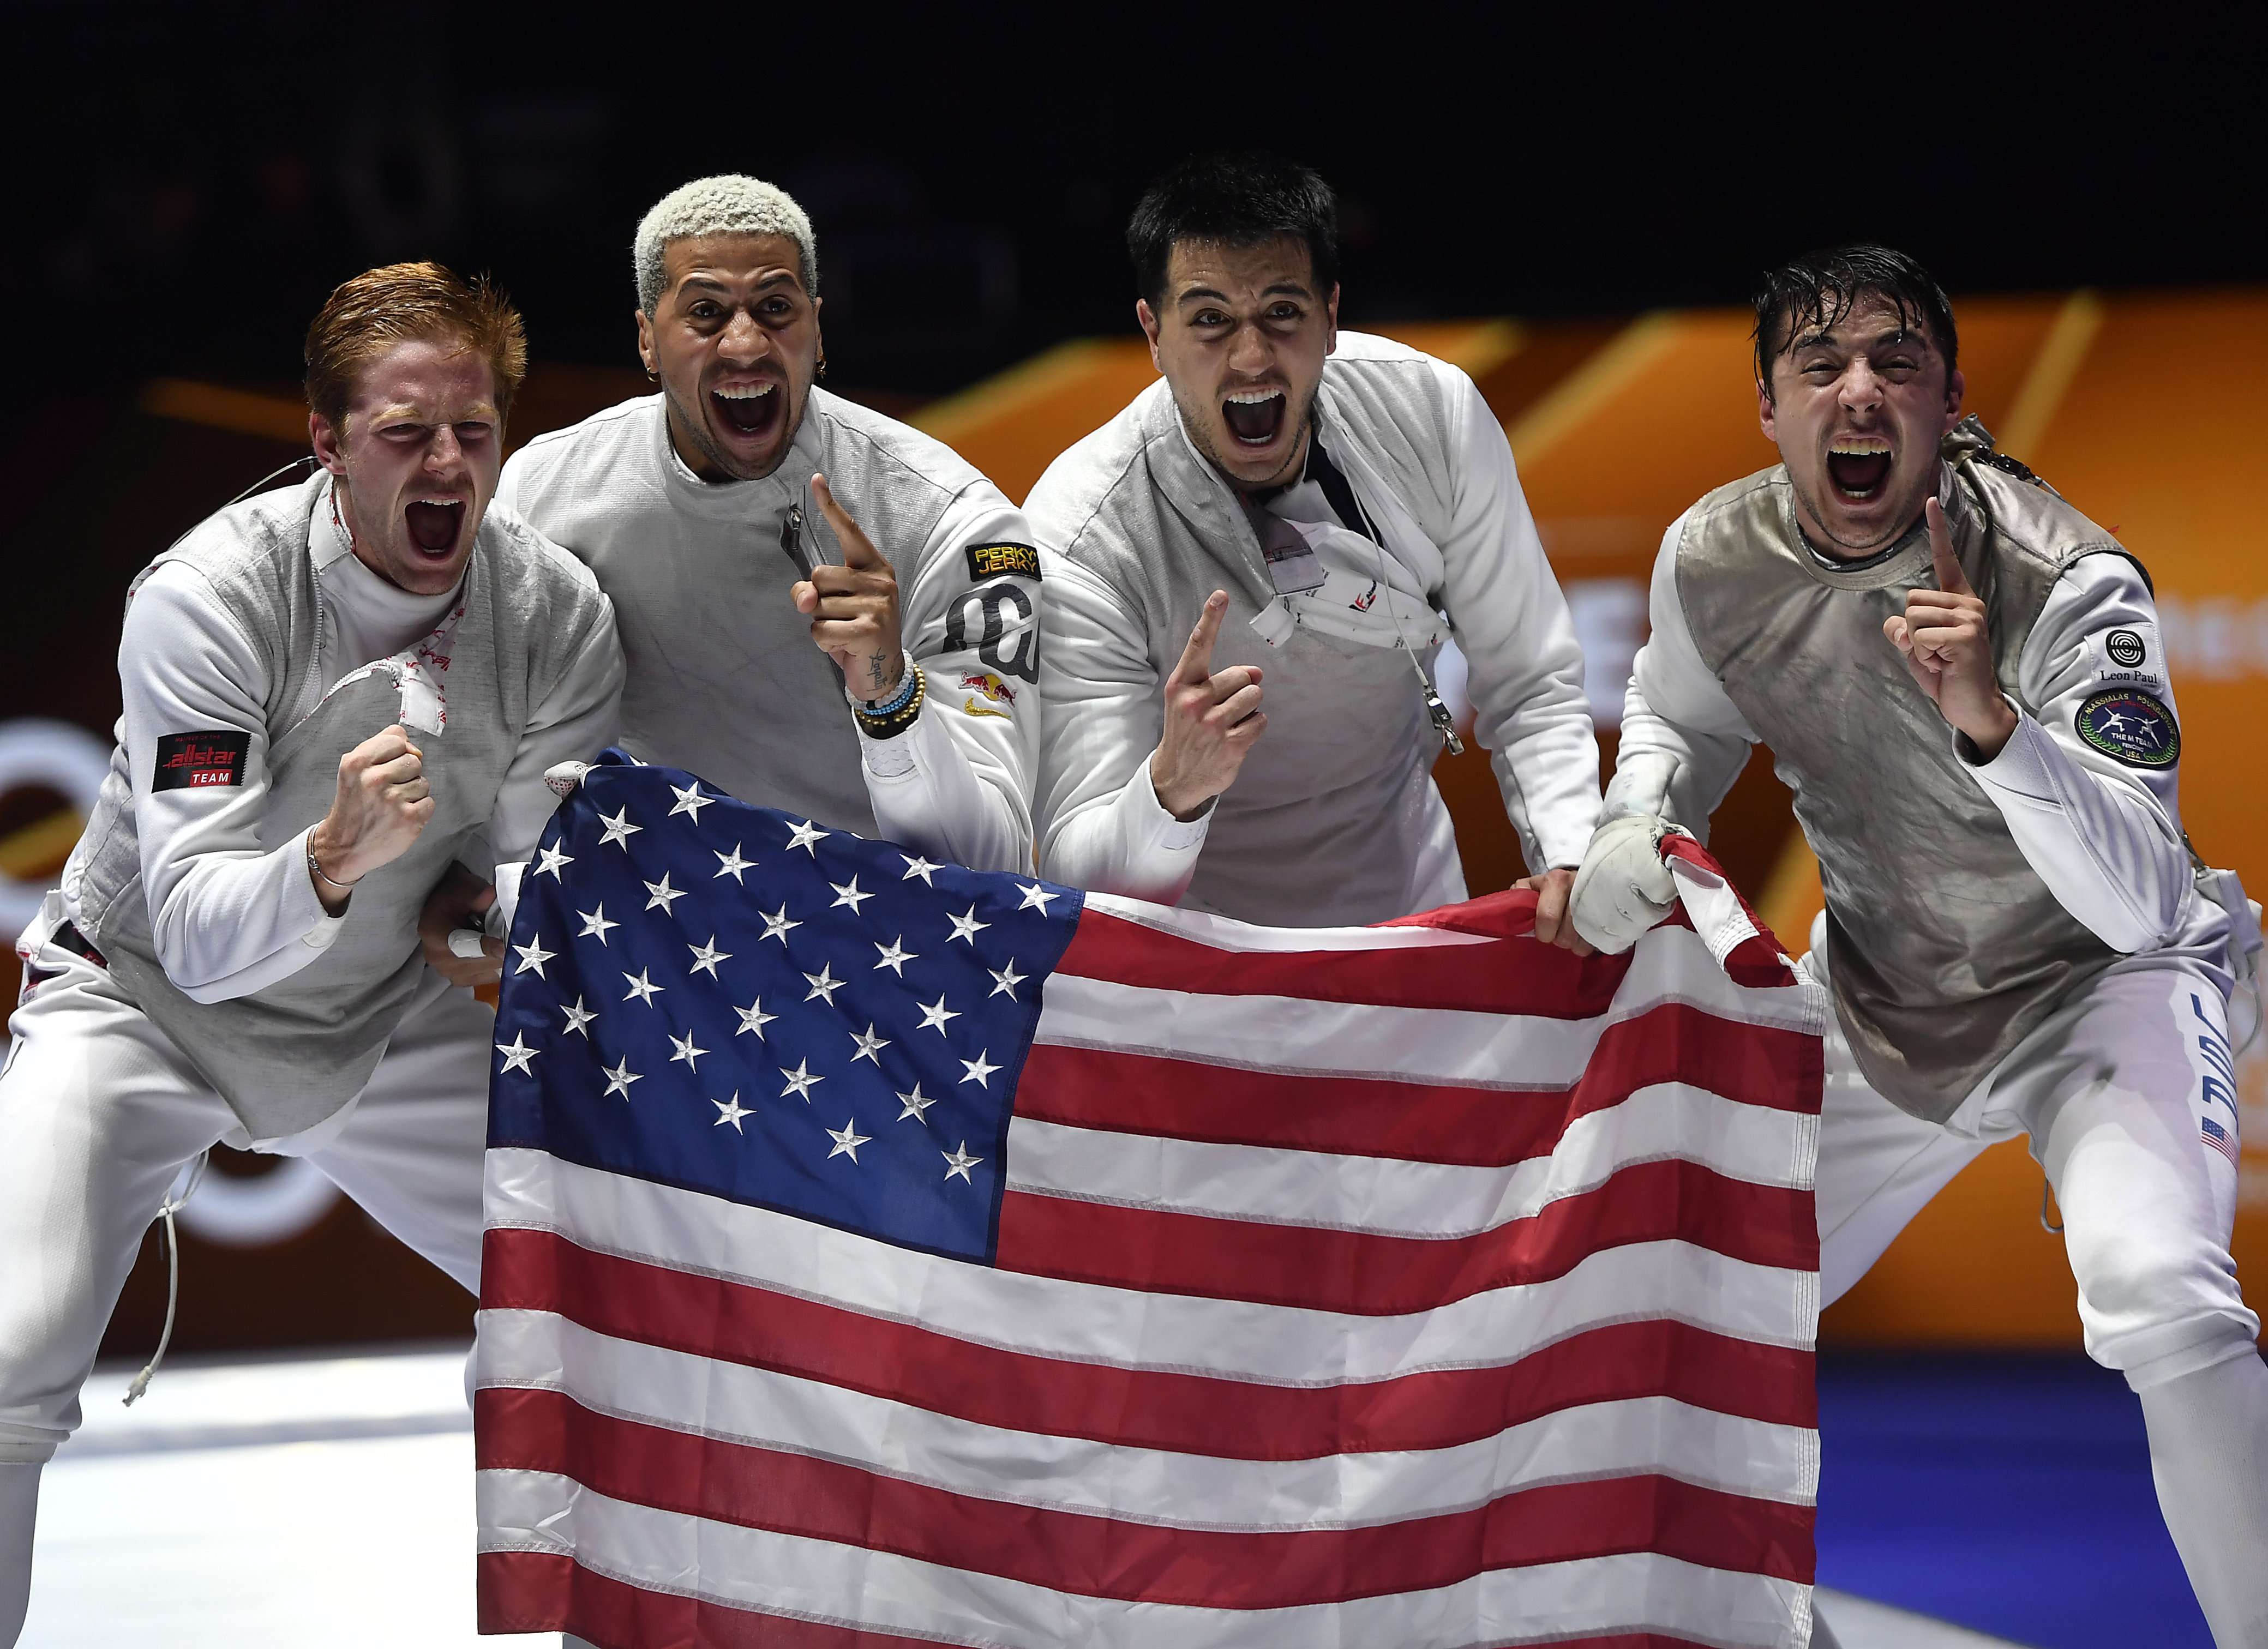 Fencing Men's foil team United States wins gold Photos Daily